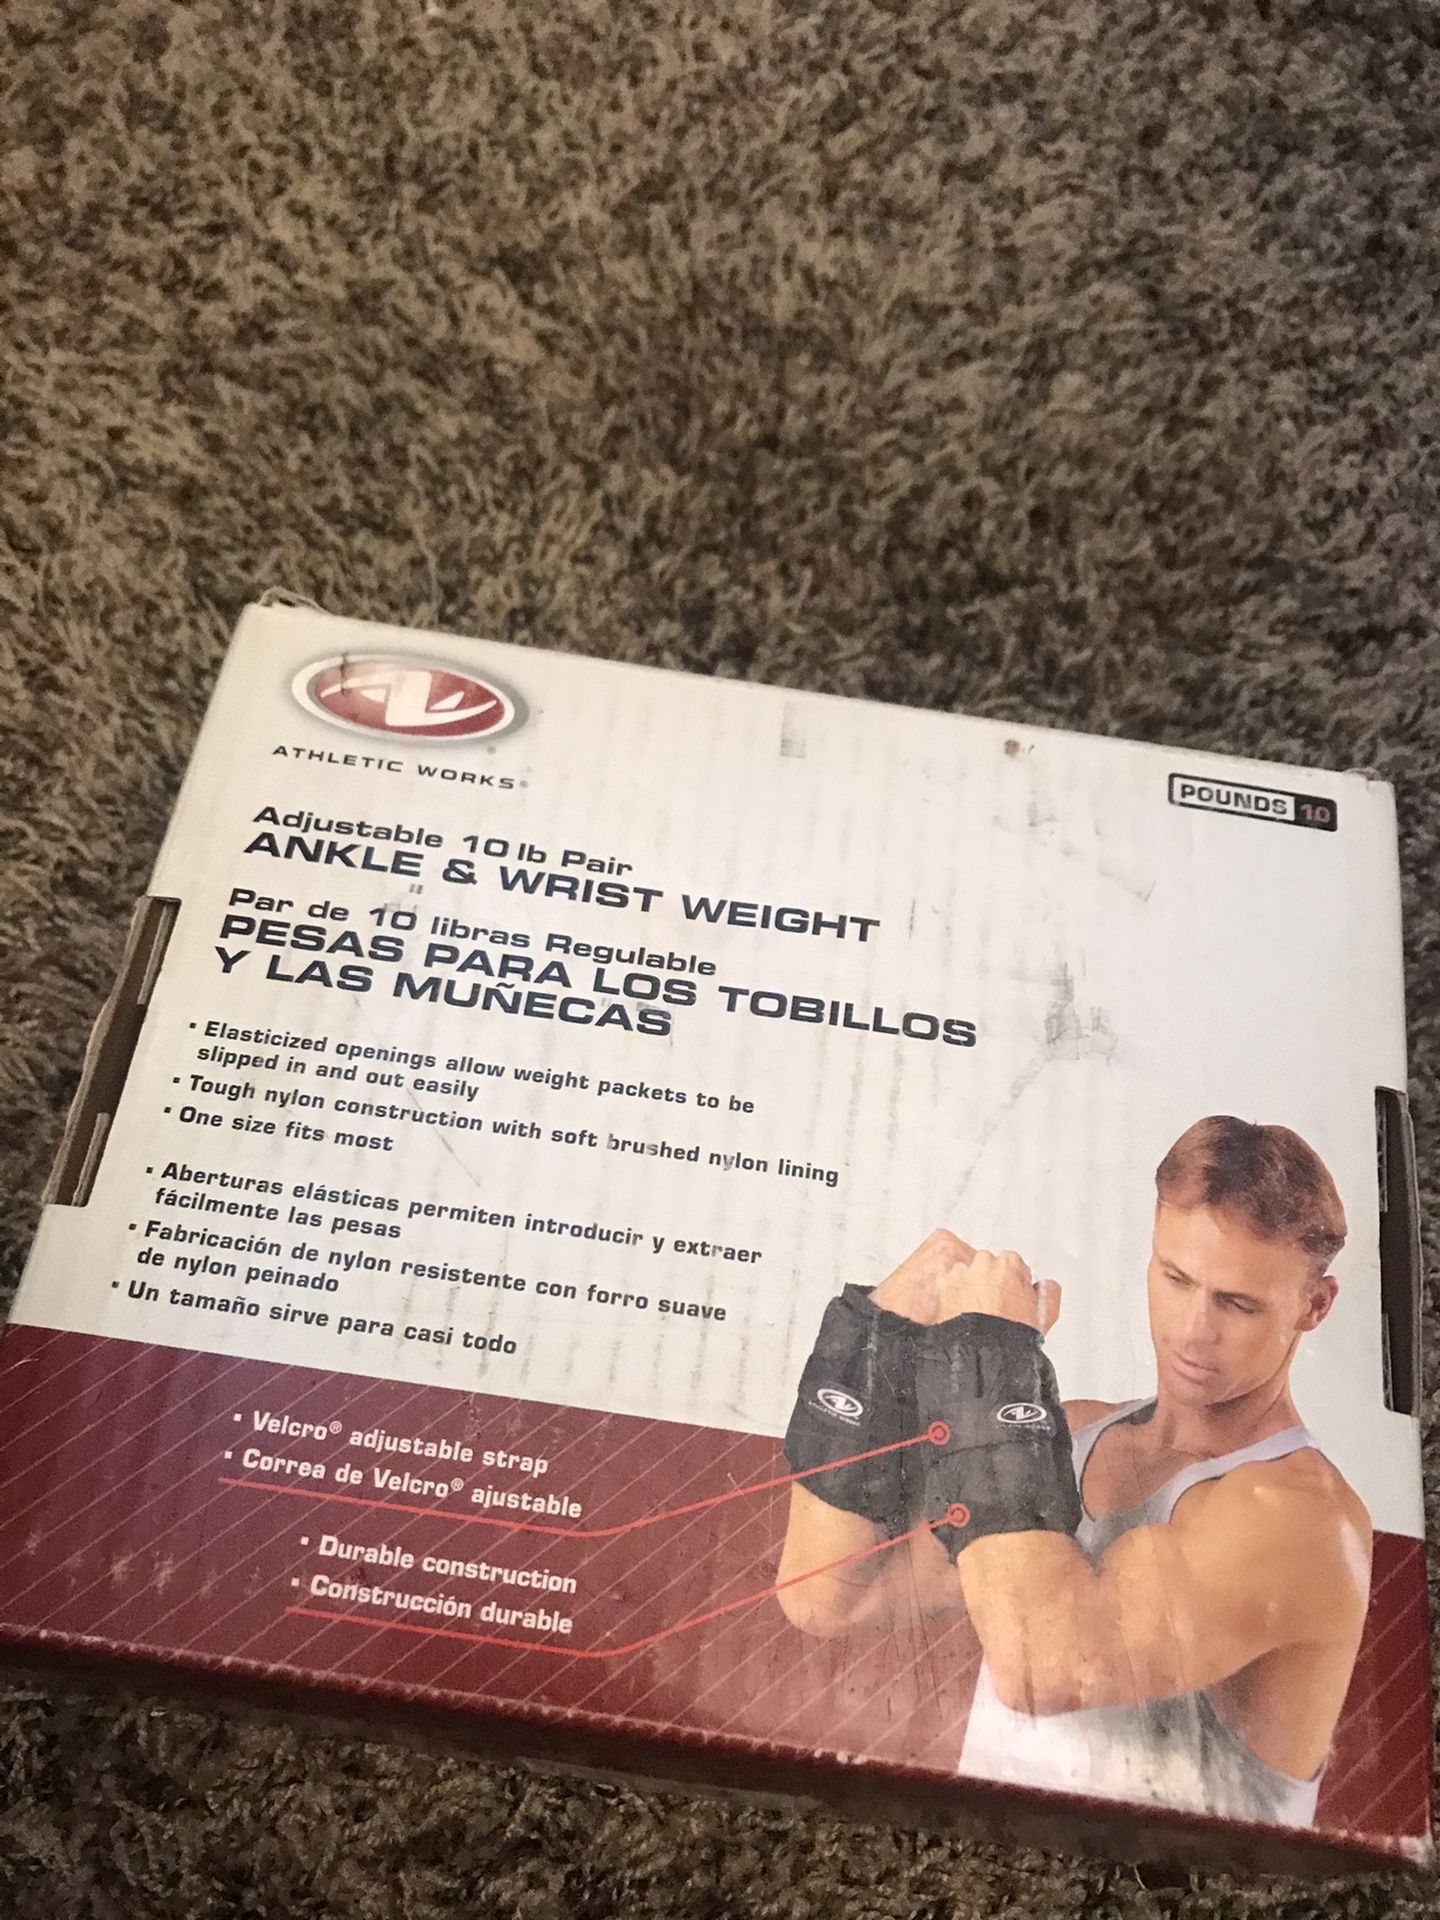 Ankle and wrist weights